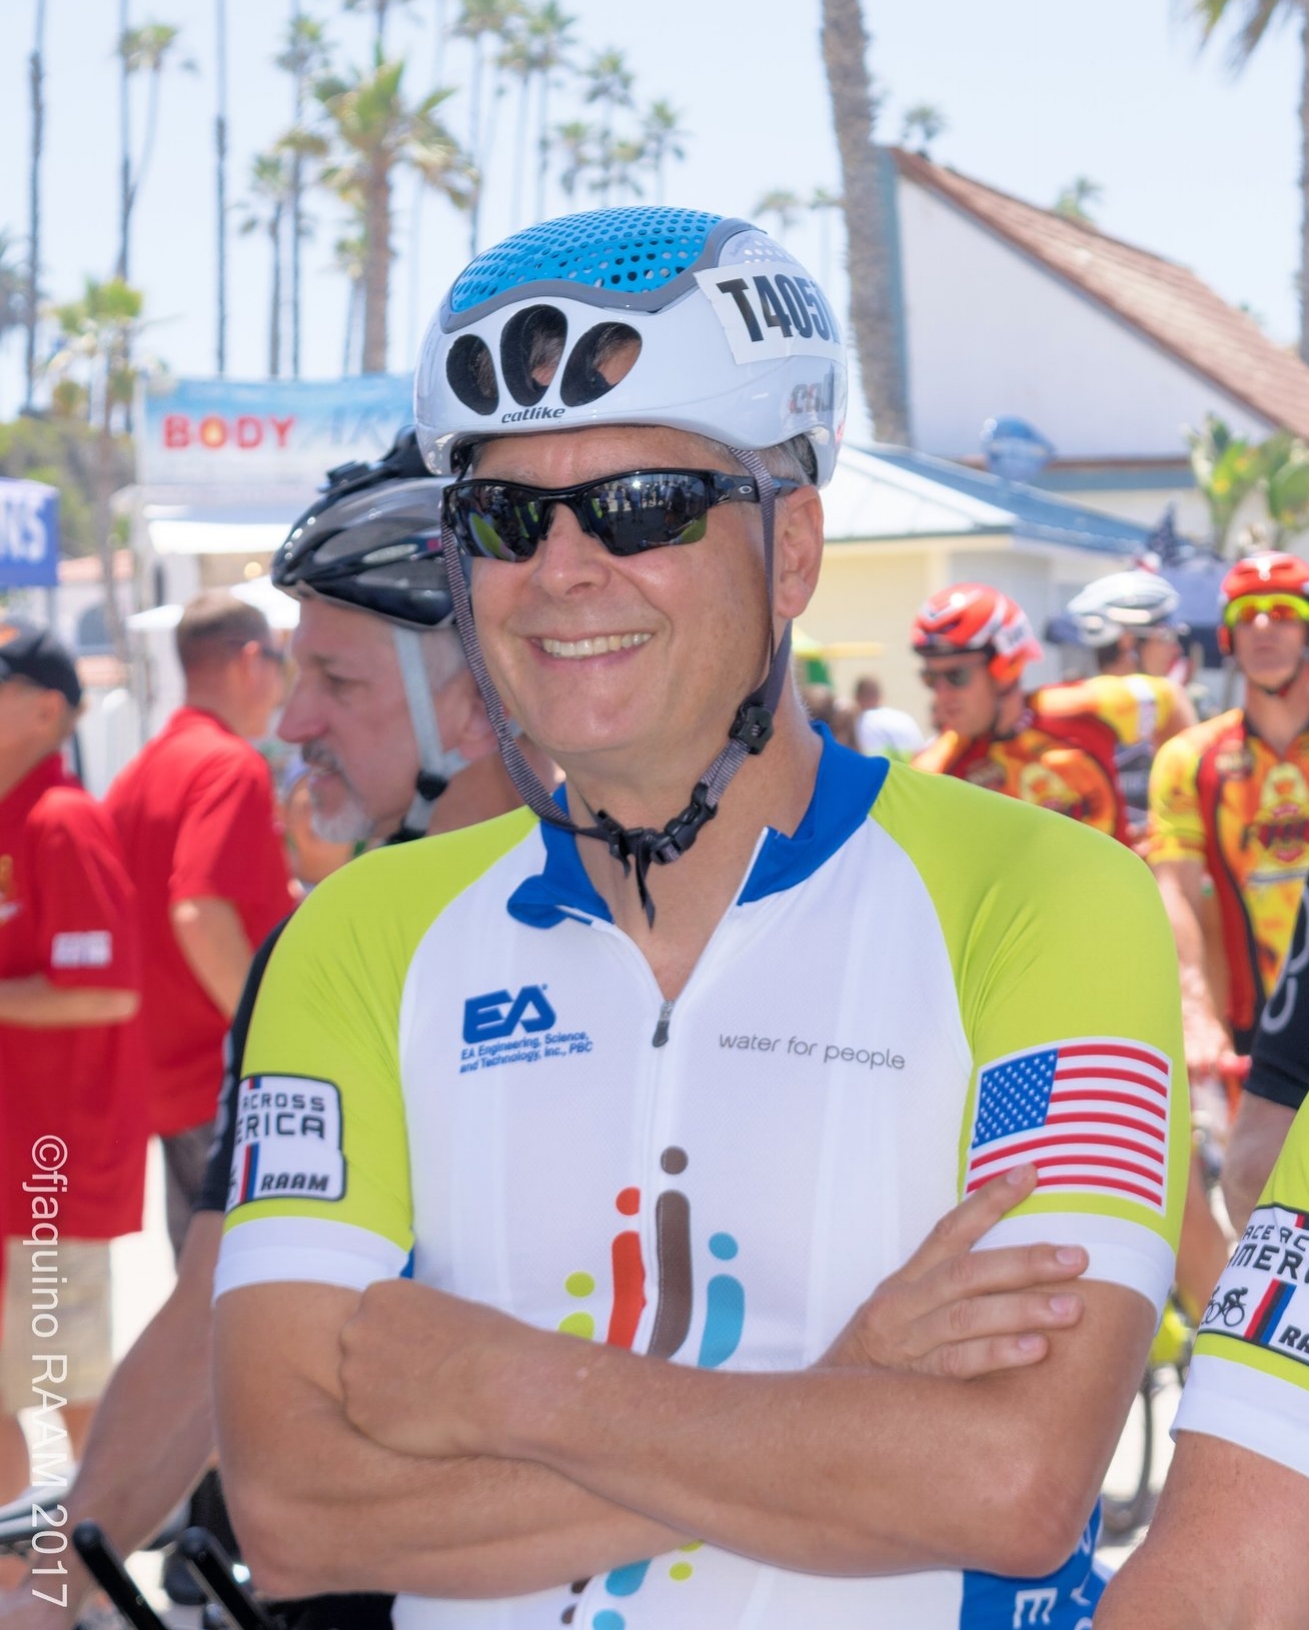 Meet the Rider: Jeff Boltz — Cycling For Water